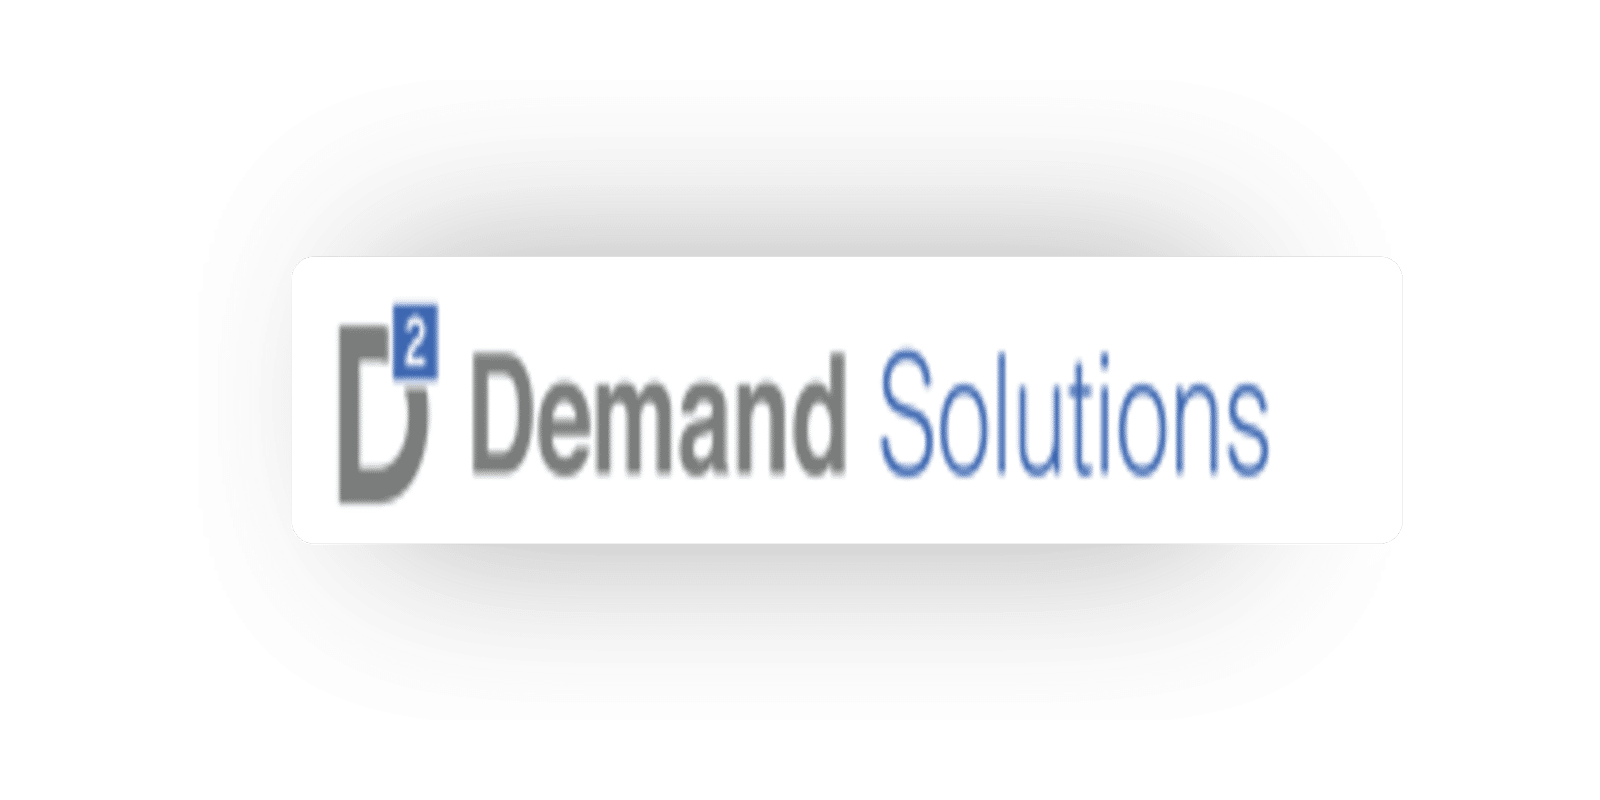 D2 Demand Solutions is a consulting company that specializes in revenue growth for multifamily assets. They have partnered with Grace Hill to provide the Sales Performance Improvement & Coaching series within our training solutions. D2 has extensive experience in Property Management and is considered an expert in their field.